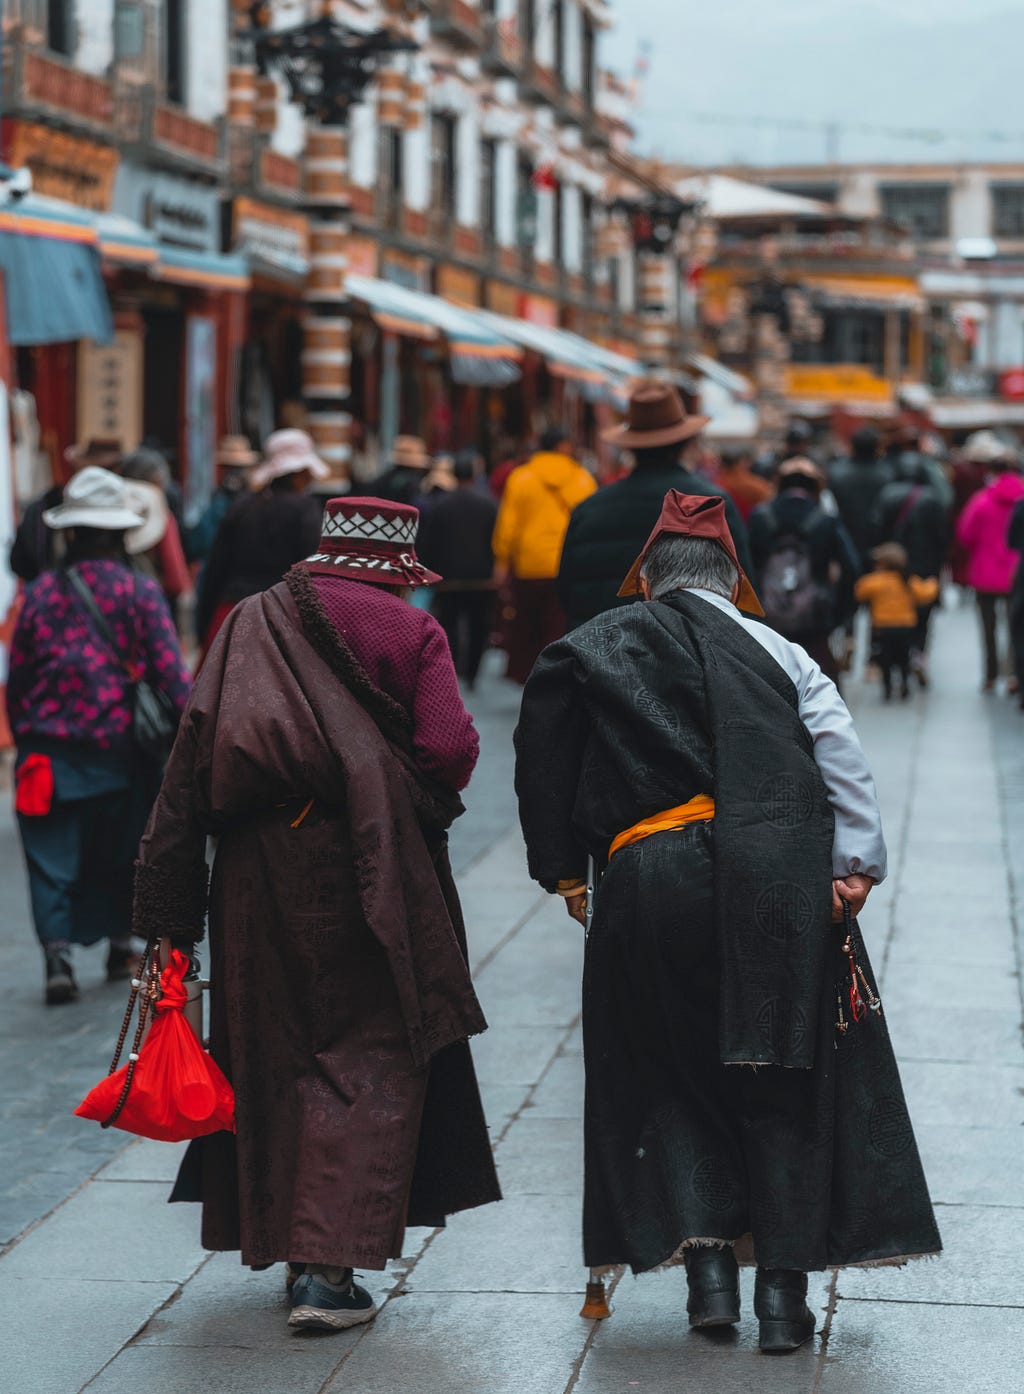 Barkhor squar and Local Market in Tibet.